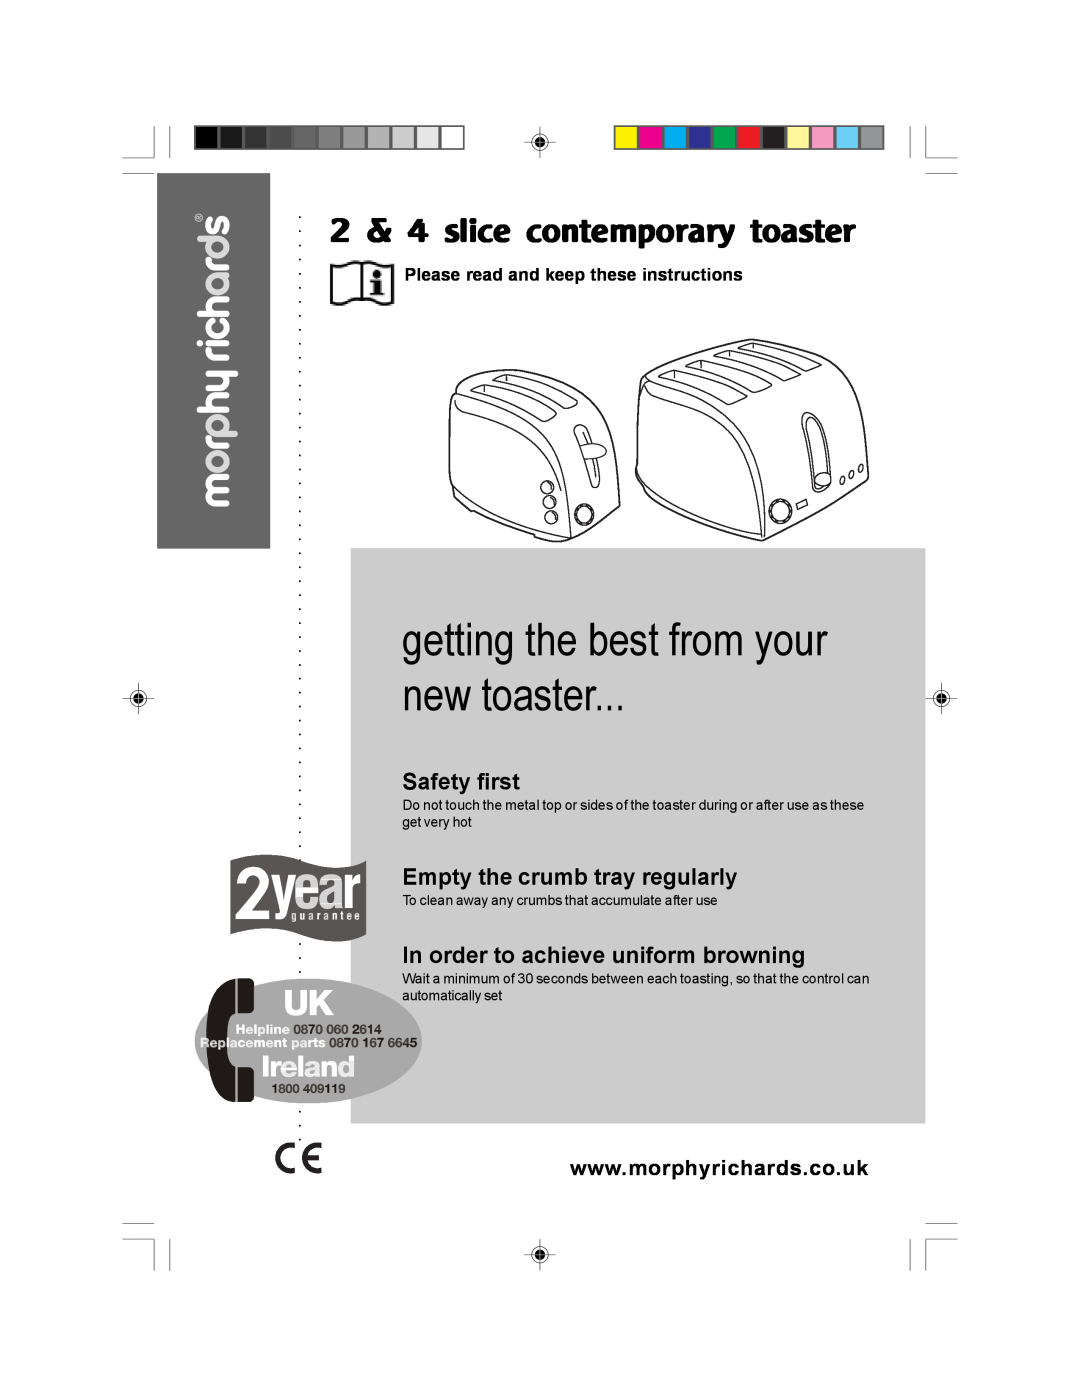 Morphy Richards contemporary manual Please read and keep these instructions, getting the best from your new toaster 